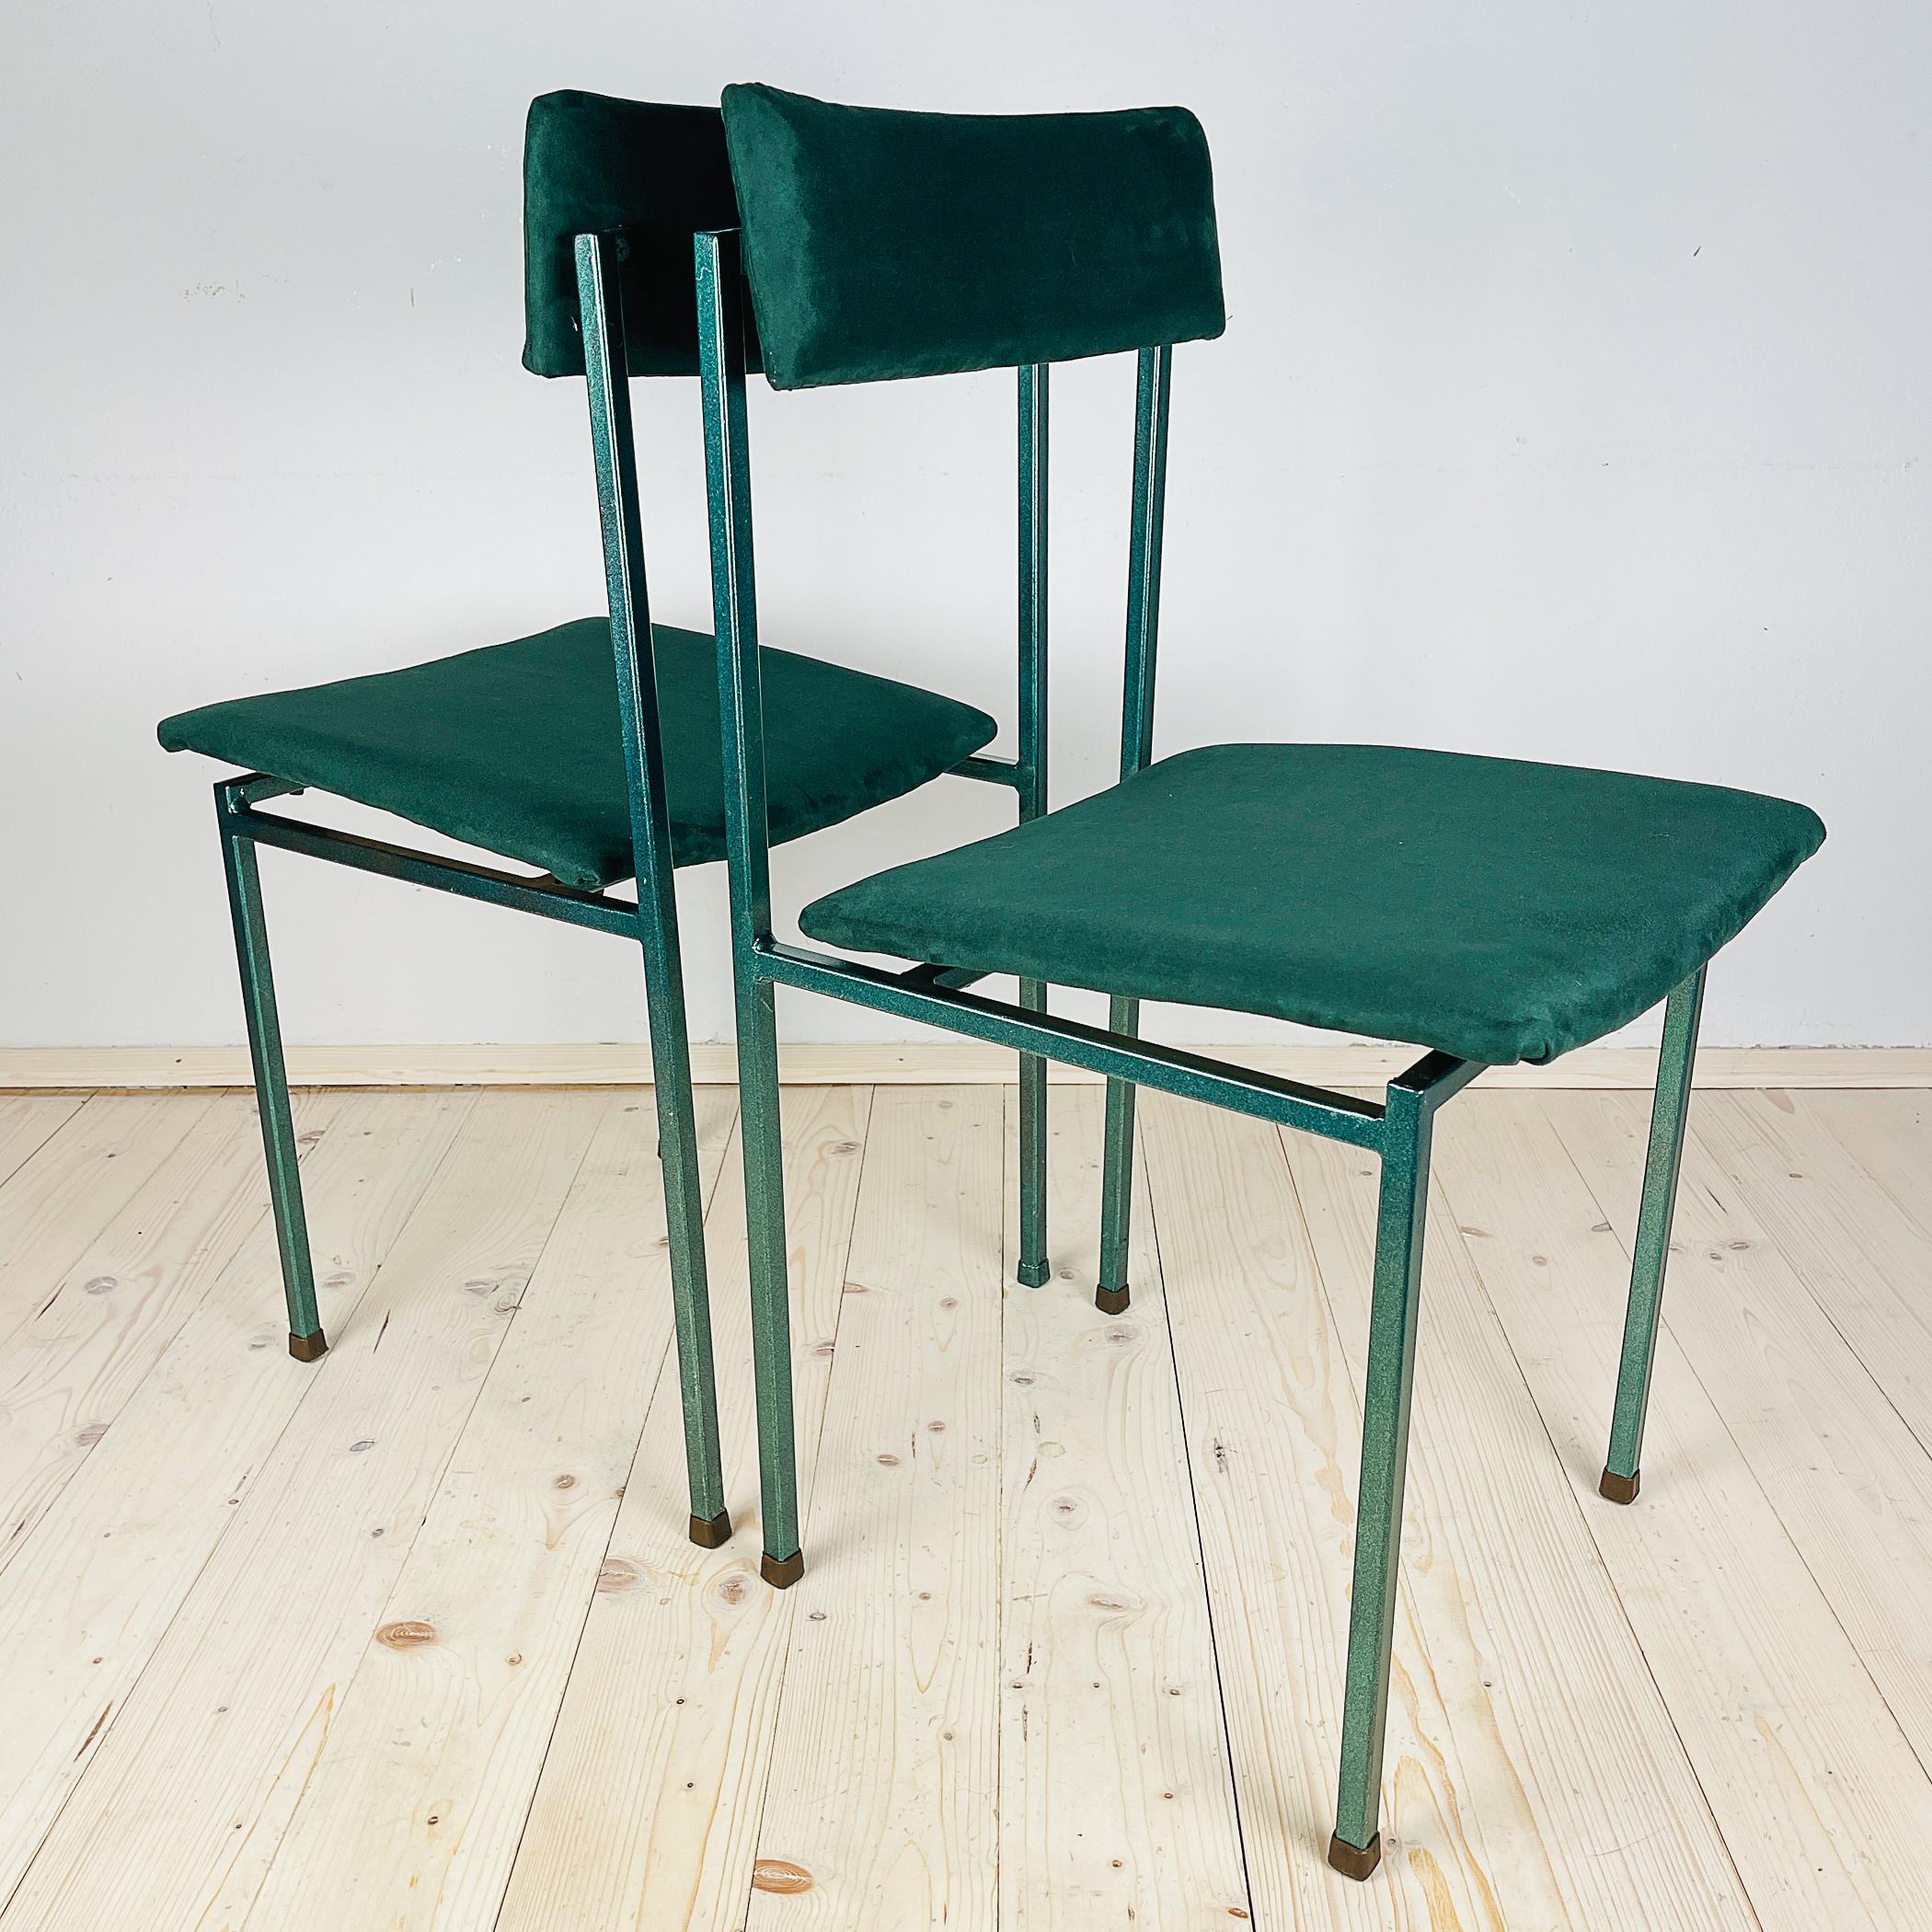 The pair of green chairs by Stol Kamnik made in Yugoslavia in the 1970s. The chairs are elegant, stable, comfortable. Pair of chairs are in very good condition, the upholstery of the chairs has been updated. Dimensions: Width: 40 cm / 15,75 inches